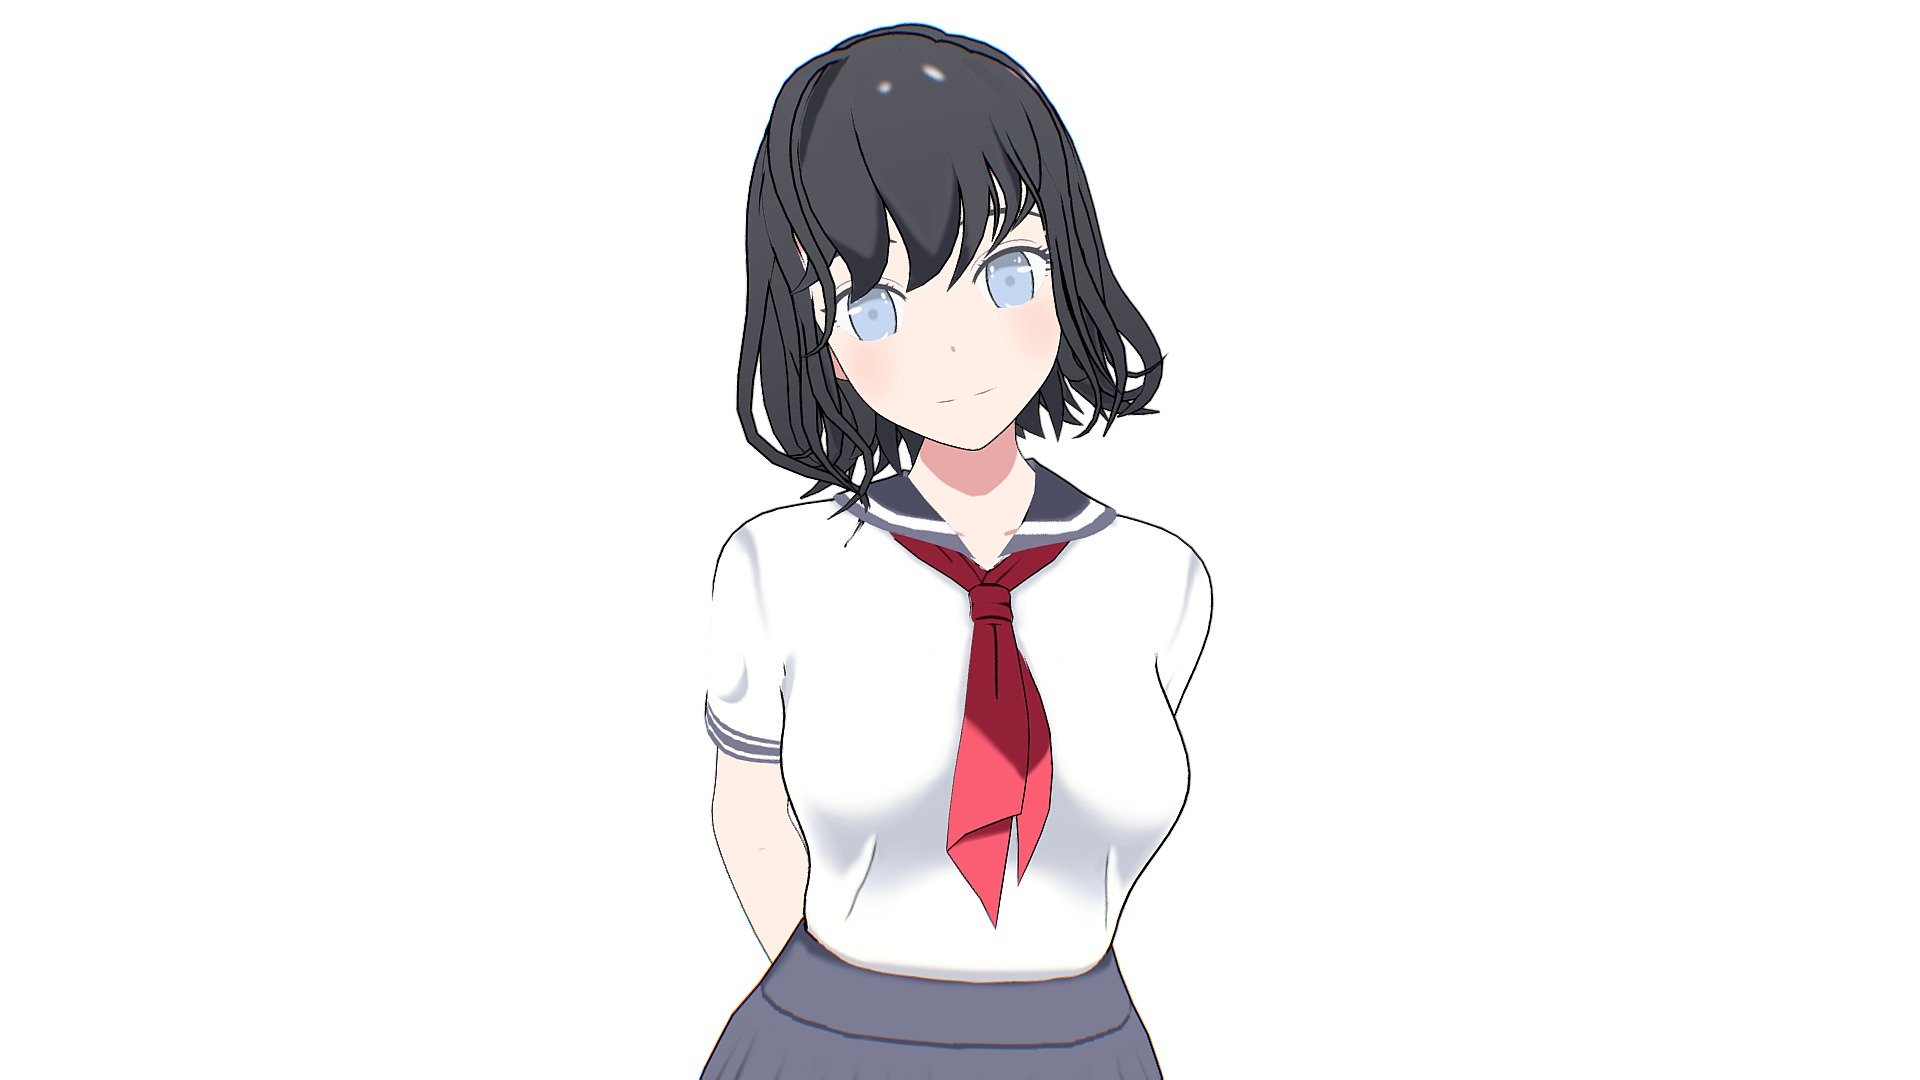 “I’m a studious anime girl who loves to learn new things. I always have my nose buried in a book, and I love to wear cute school uniforms. My favorite subjects are math and science, and I always strive to do my best in class. When I’m not studying, you can find me practicing my music or hanging out with my friends.”

Contains:




.Blend (Blender 3.3)

.Textures

.Rigged (Auto rig pro)

Added a version   - 25/6/2023

VIDEO DEMO - Blender

Anime girl - Student - 1

Anime girl - Student - 3

Anime girl - Student - 4

Anime girl - Student - 5

All girls

IMAGES 

 - Anime girl - Student - 2 - Buy Royalty Free 3D model by LessaB3D 3d model